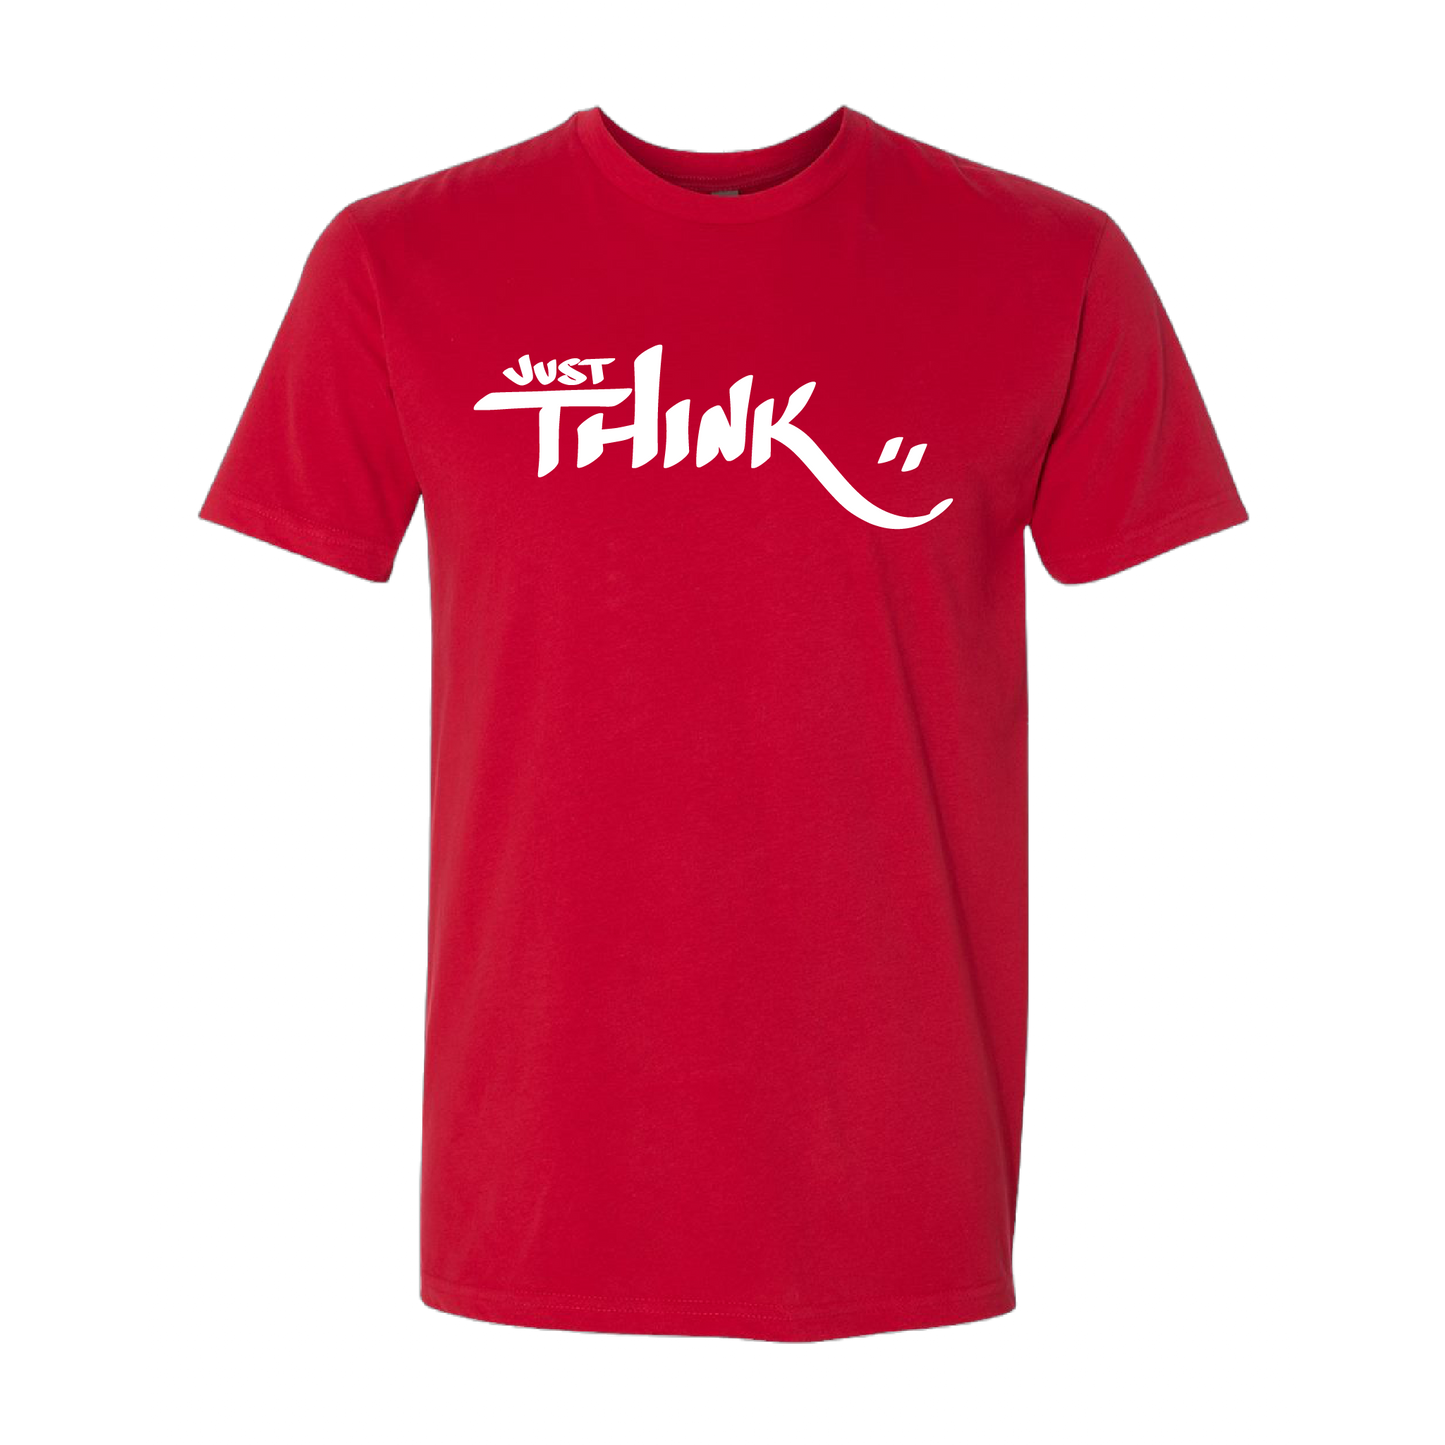 Just Think & Smile T-shirt